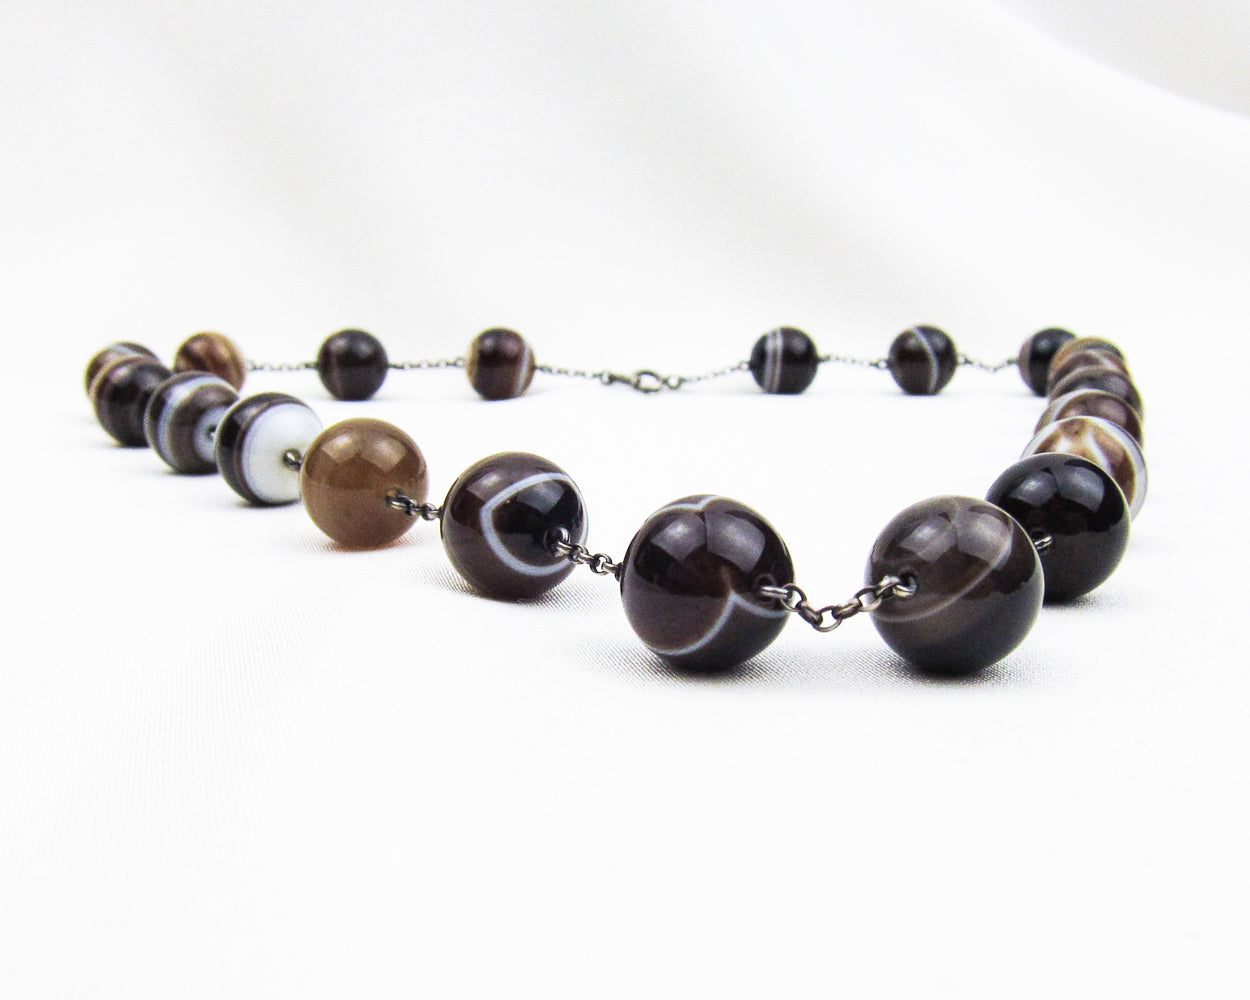 Circa 1890 Banded Agate Necklace